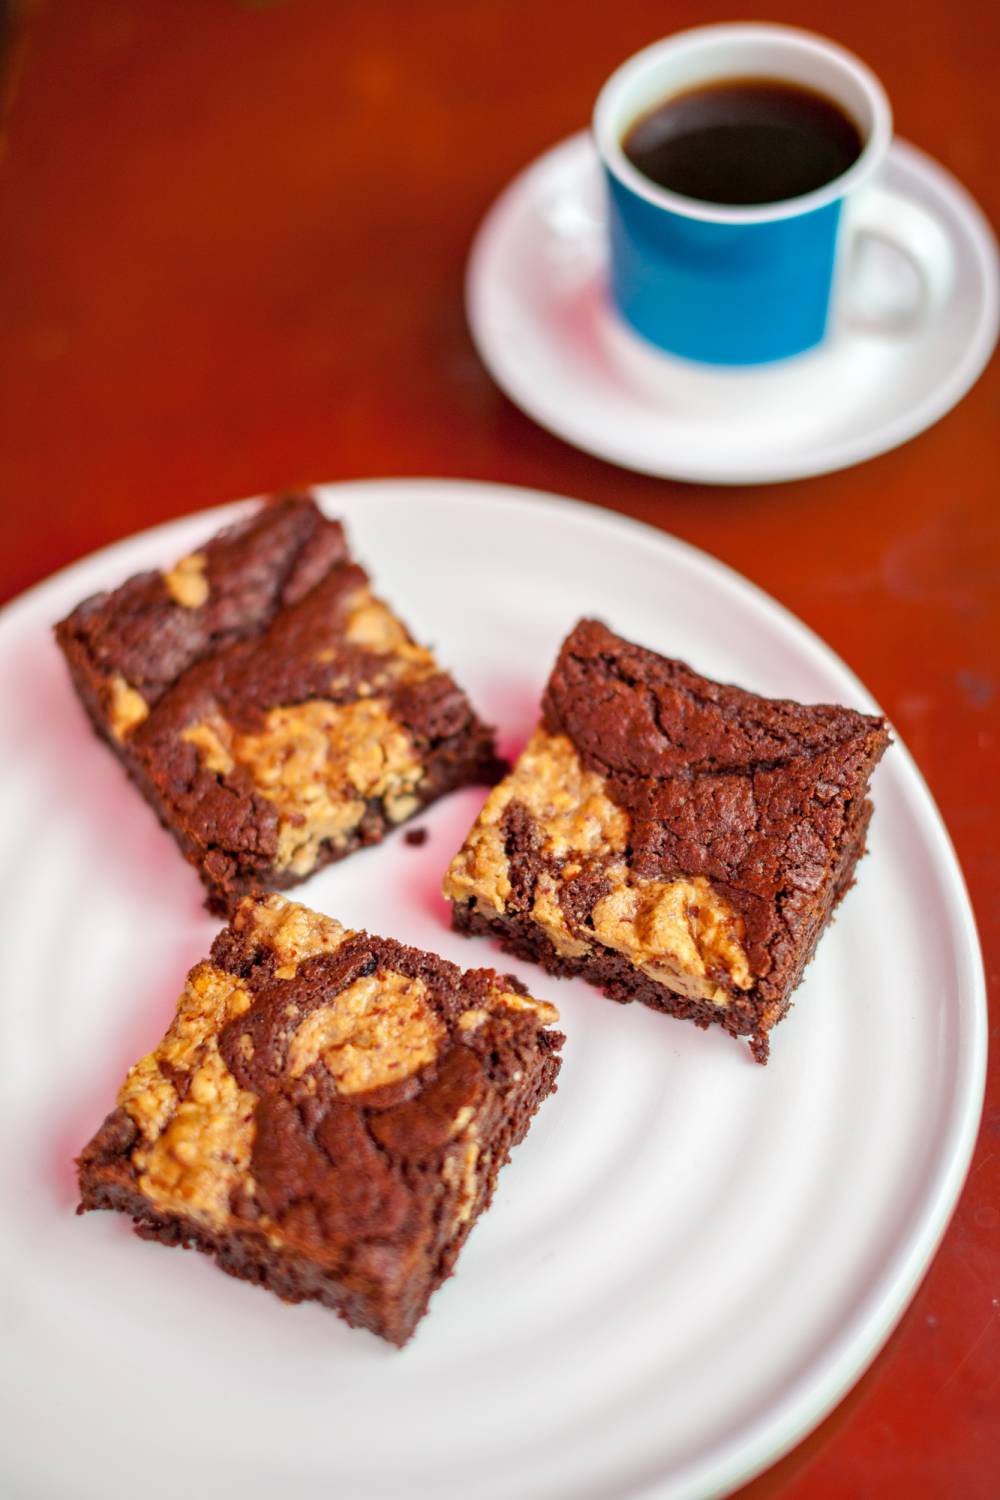 Peanut Butter Brownie - Not At All Bad!